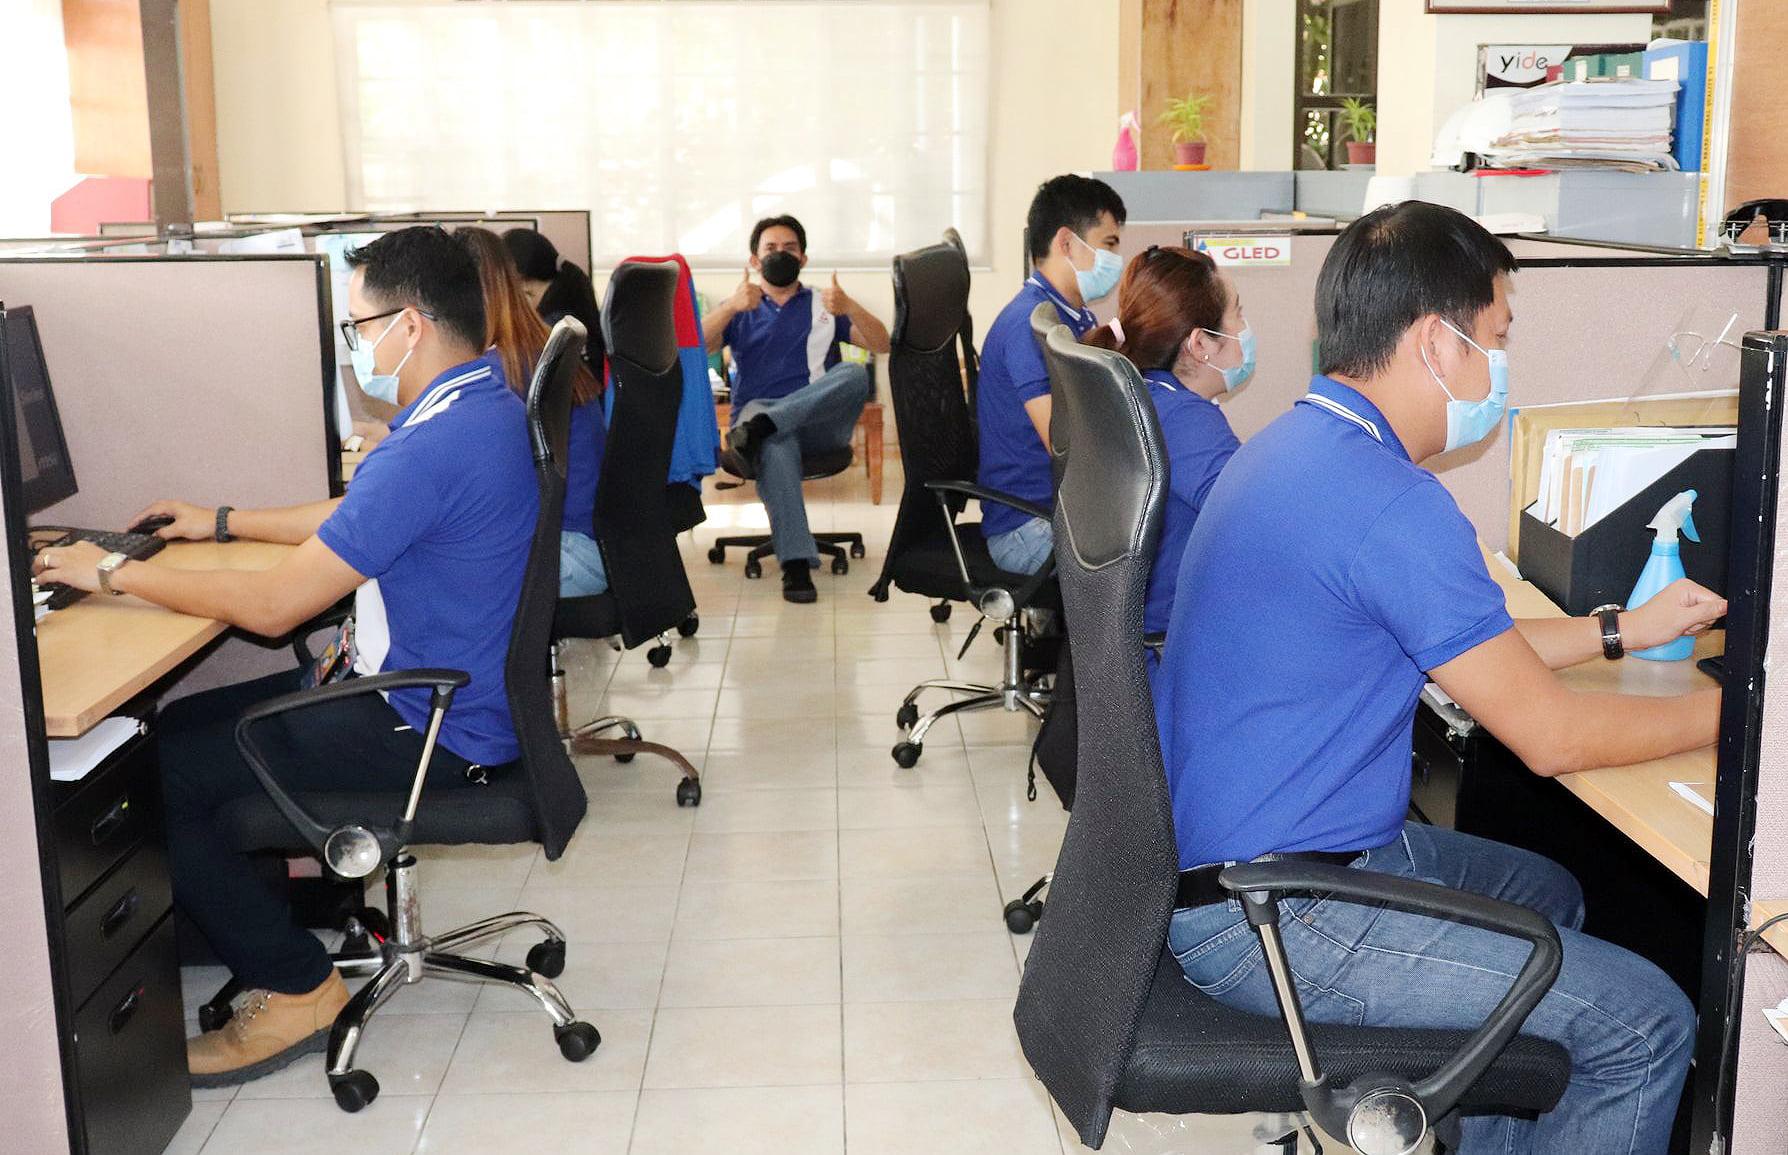 For post-COVID win: 95% of PH employers to improve employee experience